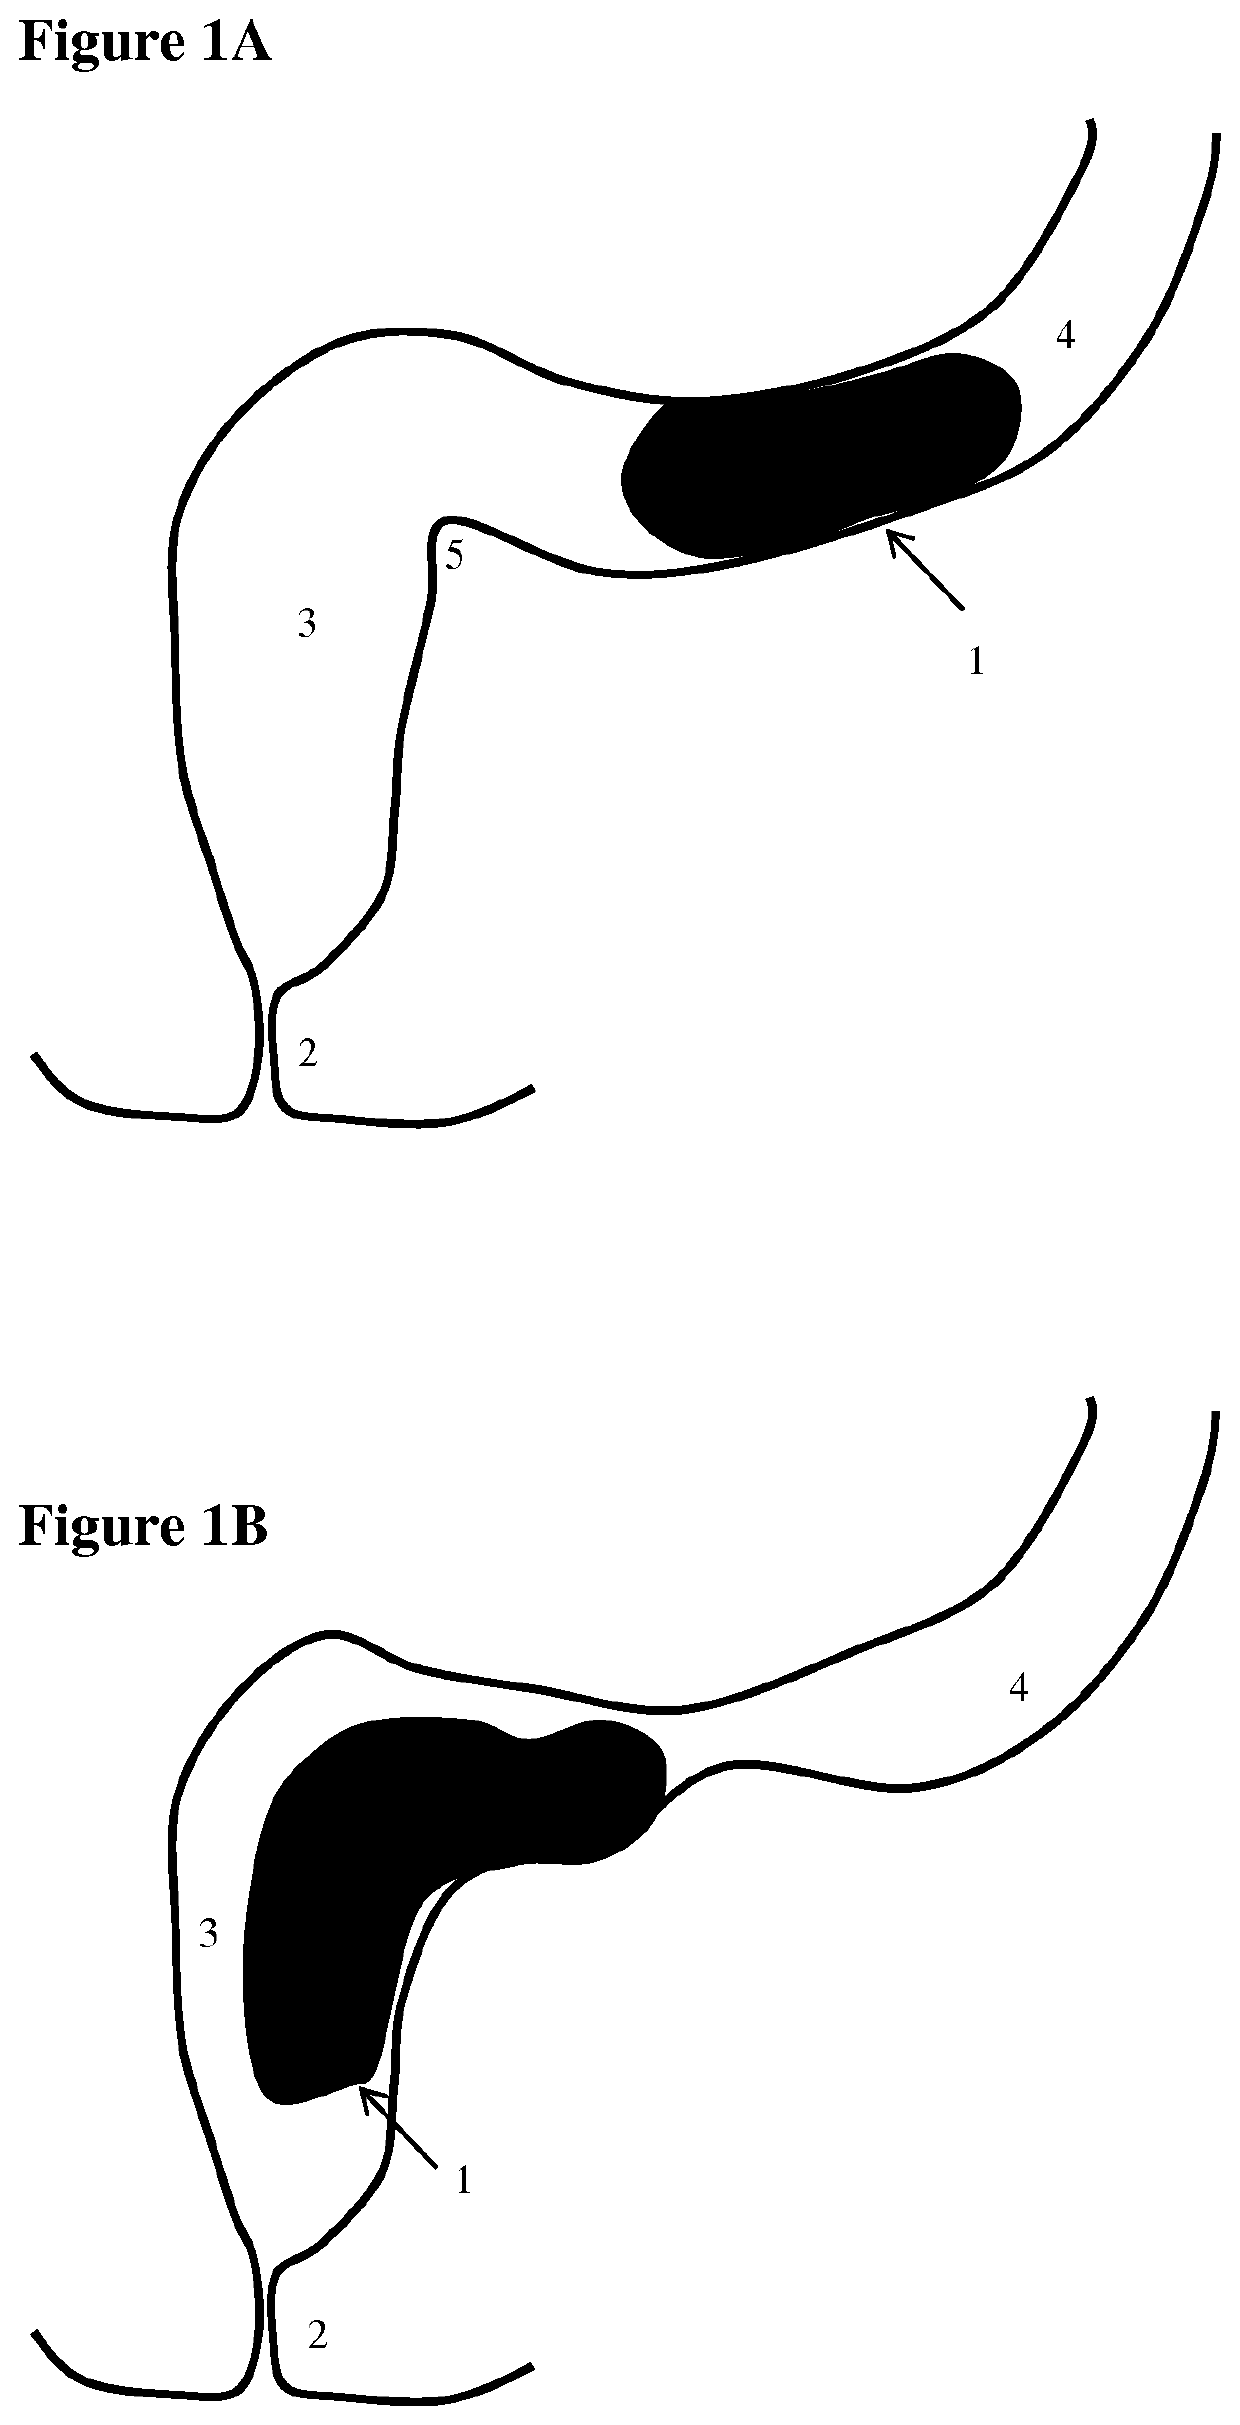 Apparatus for testing distal colonic and anorectal function